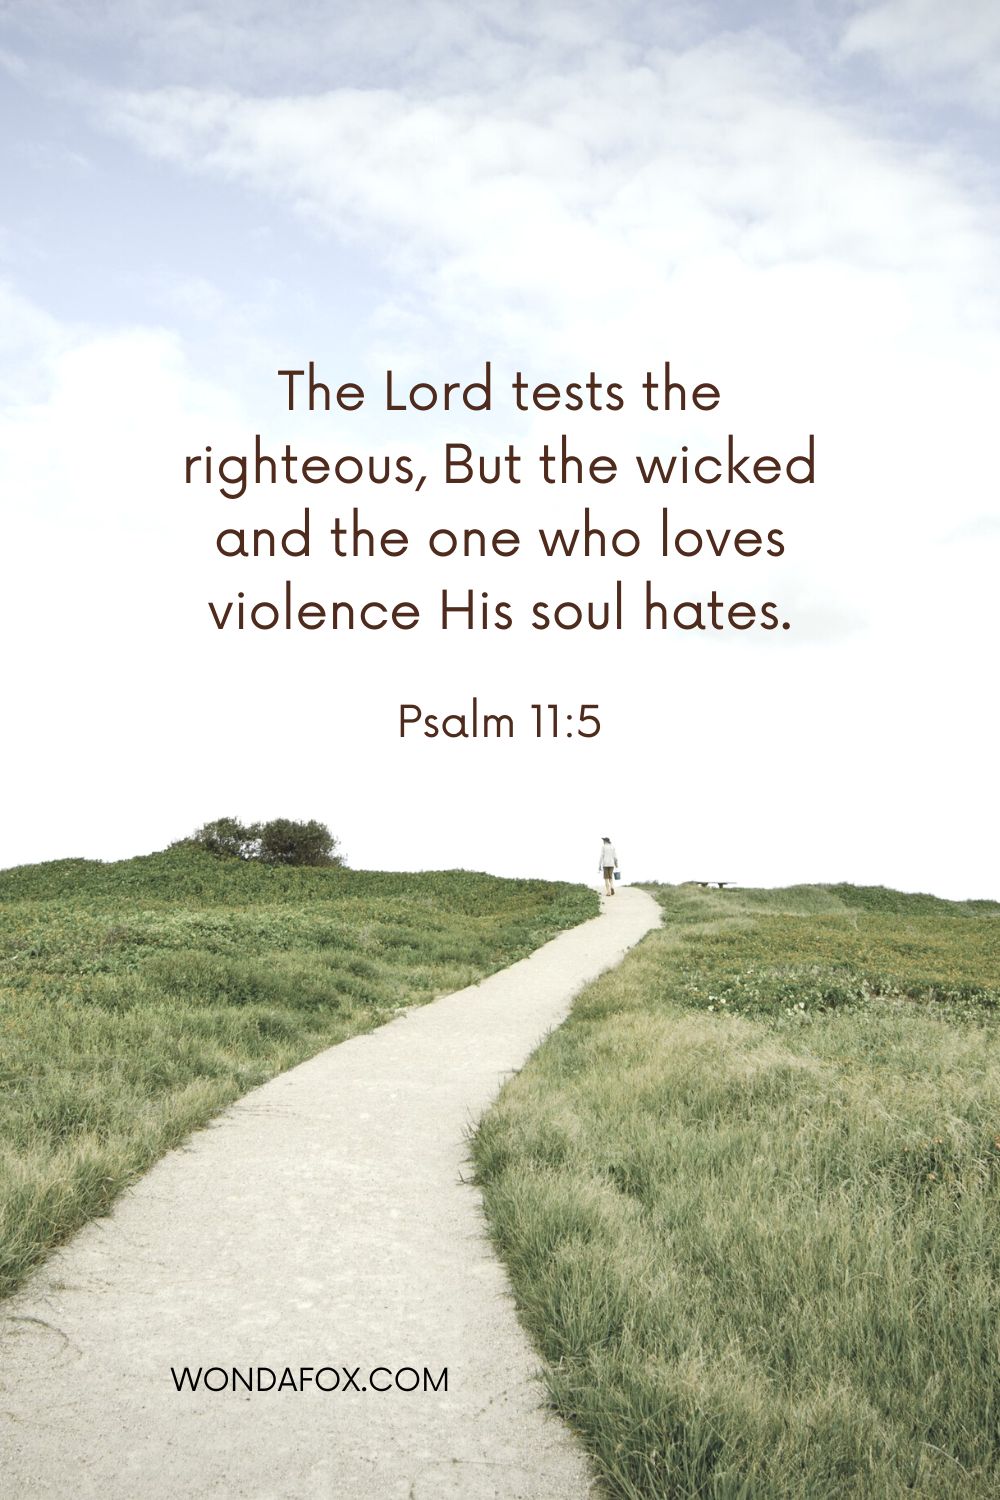 The Lord tests the righteous, But the wicked and the one who loves violence His soul hates.